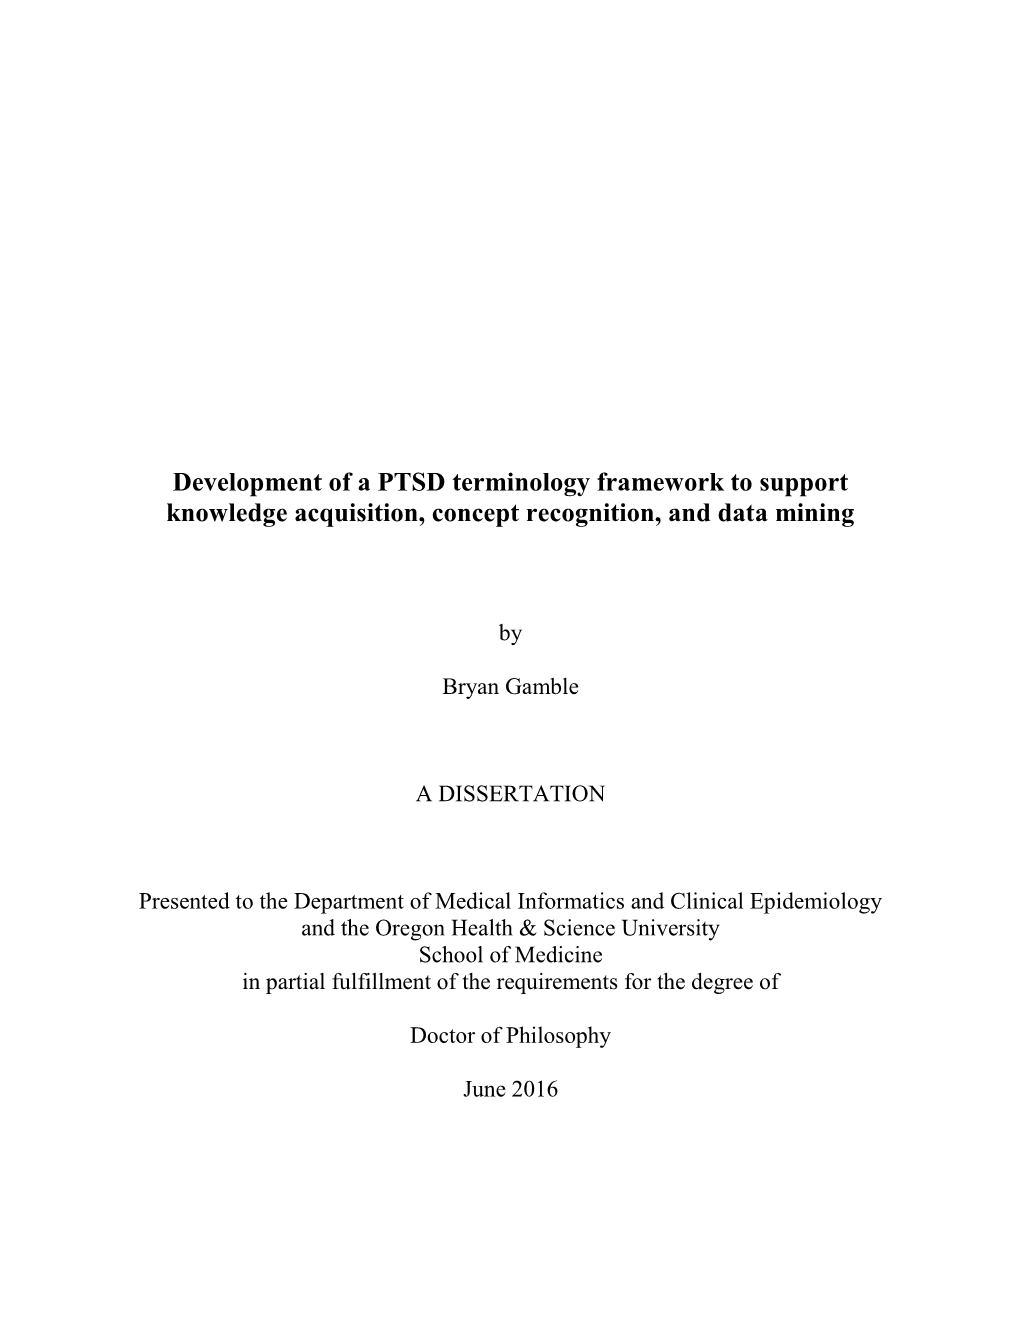 Development of a PTSD Terminology Framework to Support Knowledge Acquisition, Concept Recognition, and Data Mining